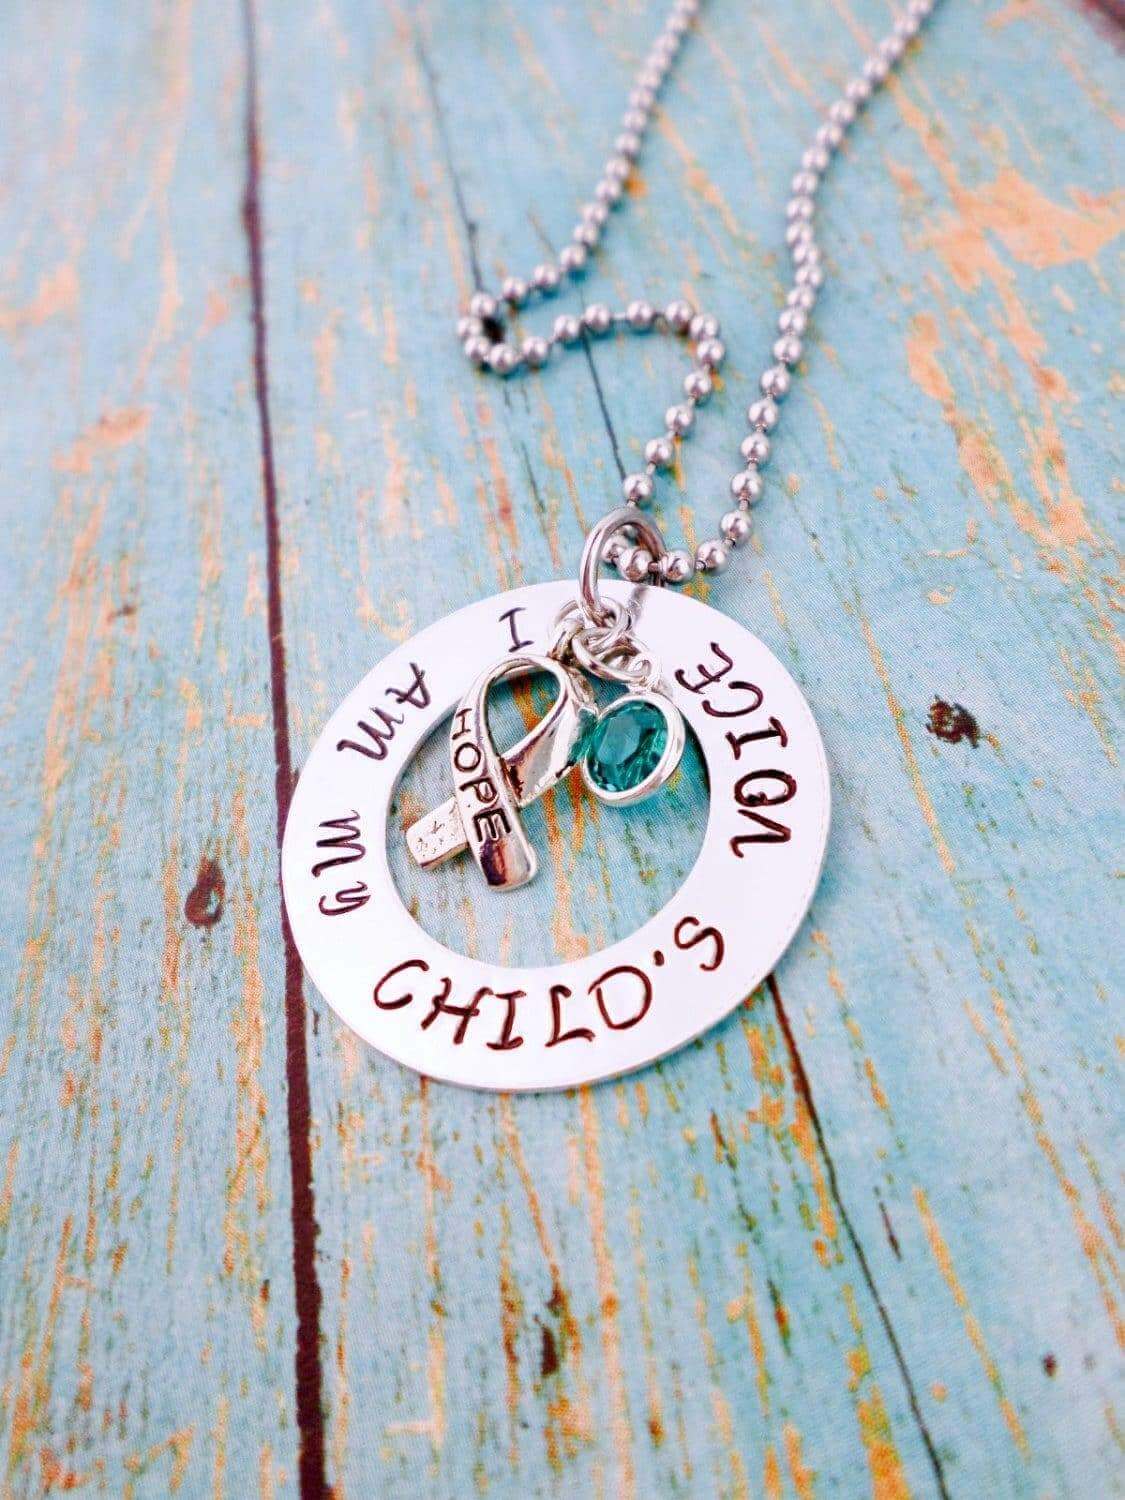 I am my child's voice, Apraxia Necklace, Hope Ribbon Necklace, Necklaces, HandmadeLoveStories, HandmadeLoveStories , [Handmade_Love_Stories], [Hand_Stamped_Jewelry], [Etsy_Stamped_Jewelry], [Etsy_Jewelry]